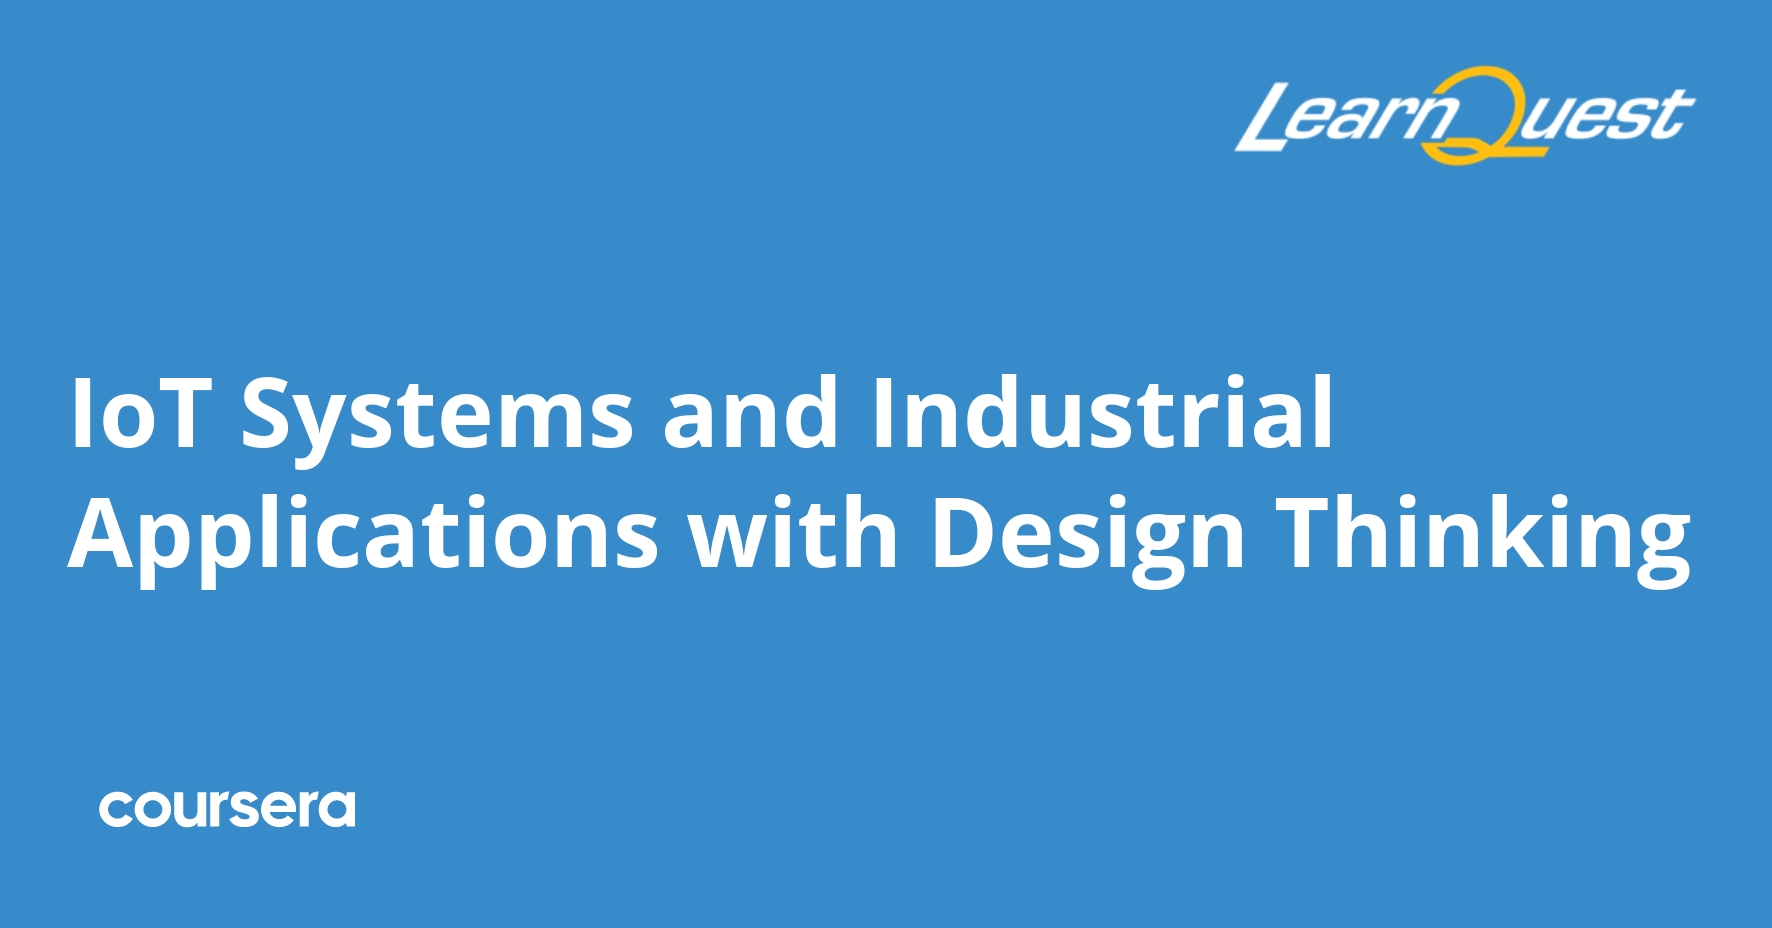 iot-systems-and-industrial-applications-with-design-thinking